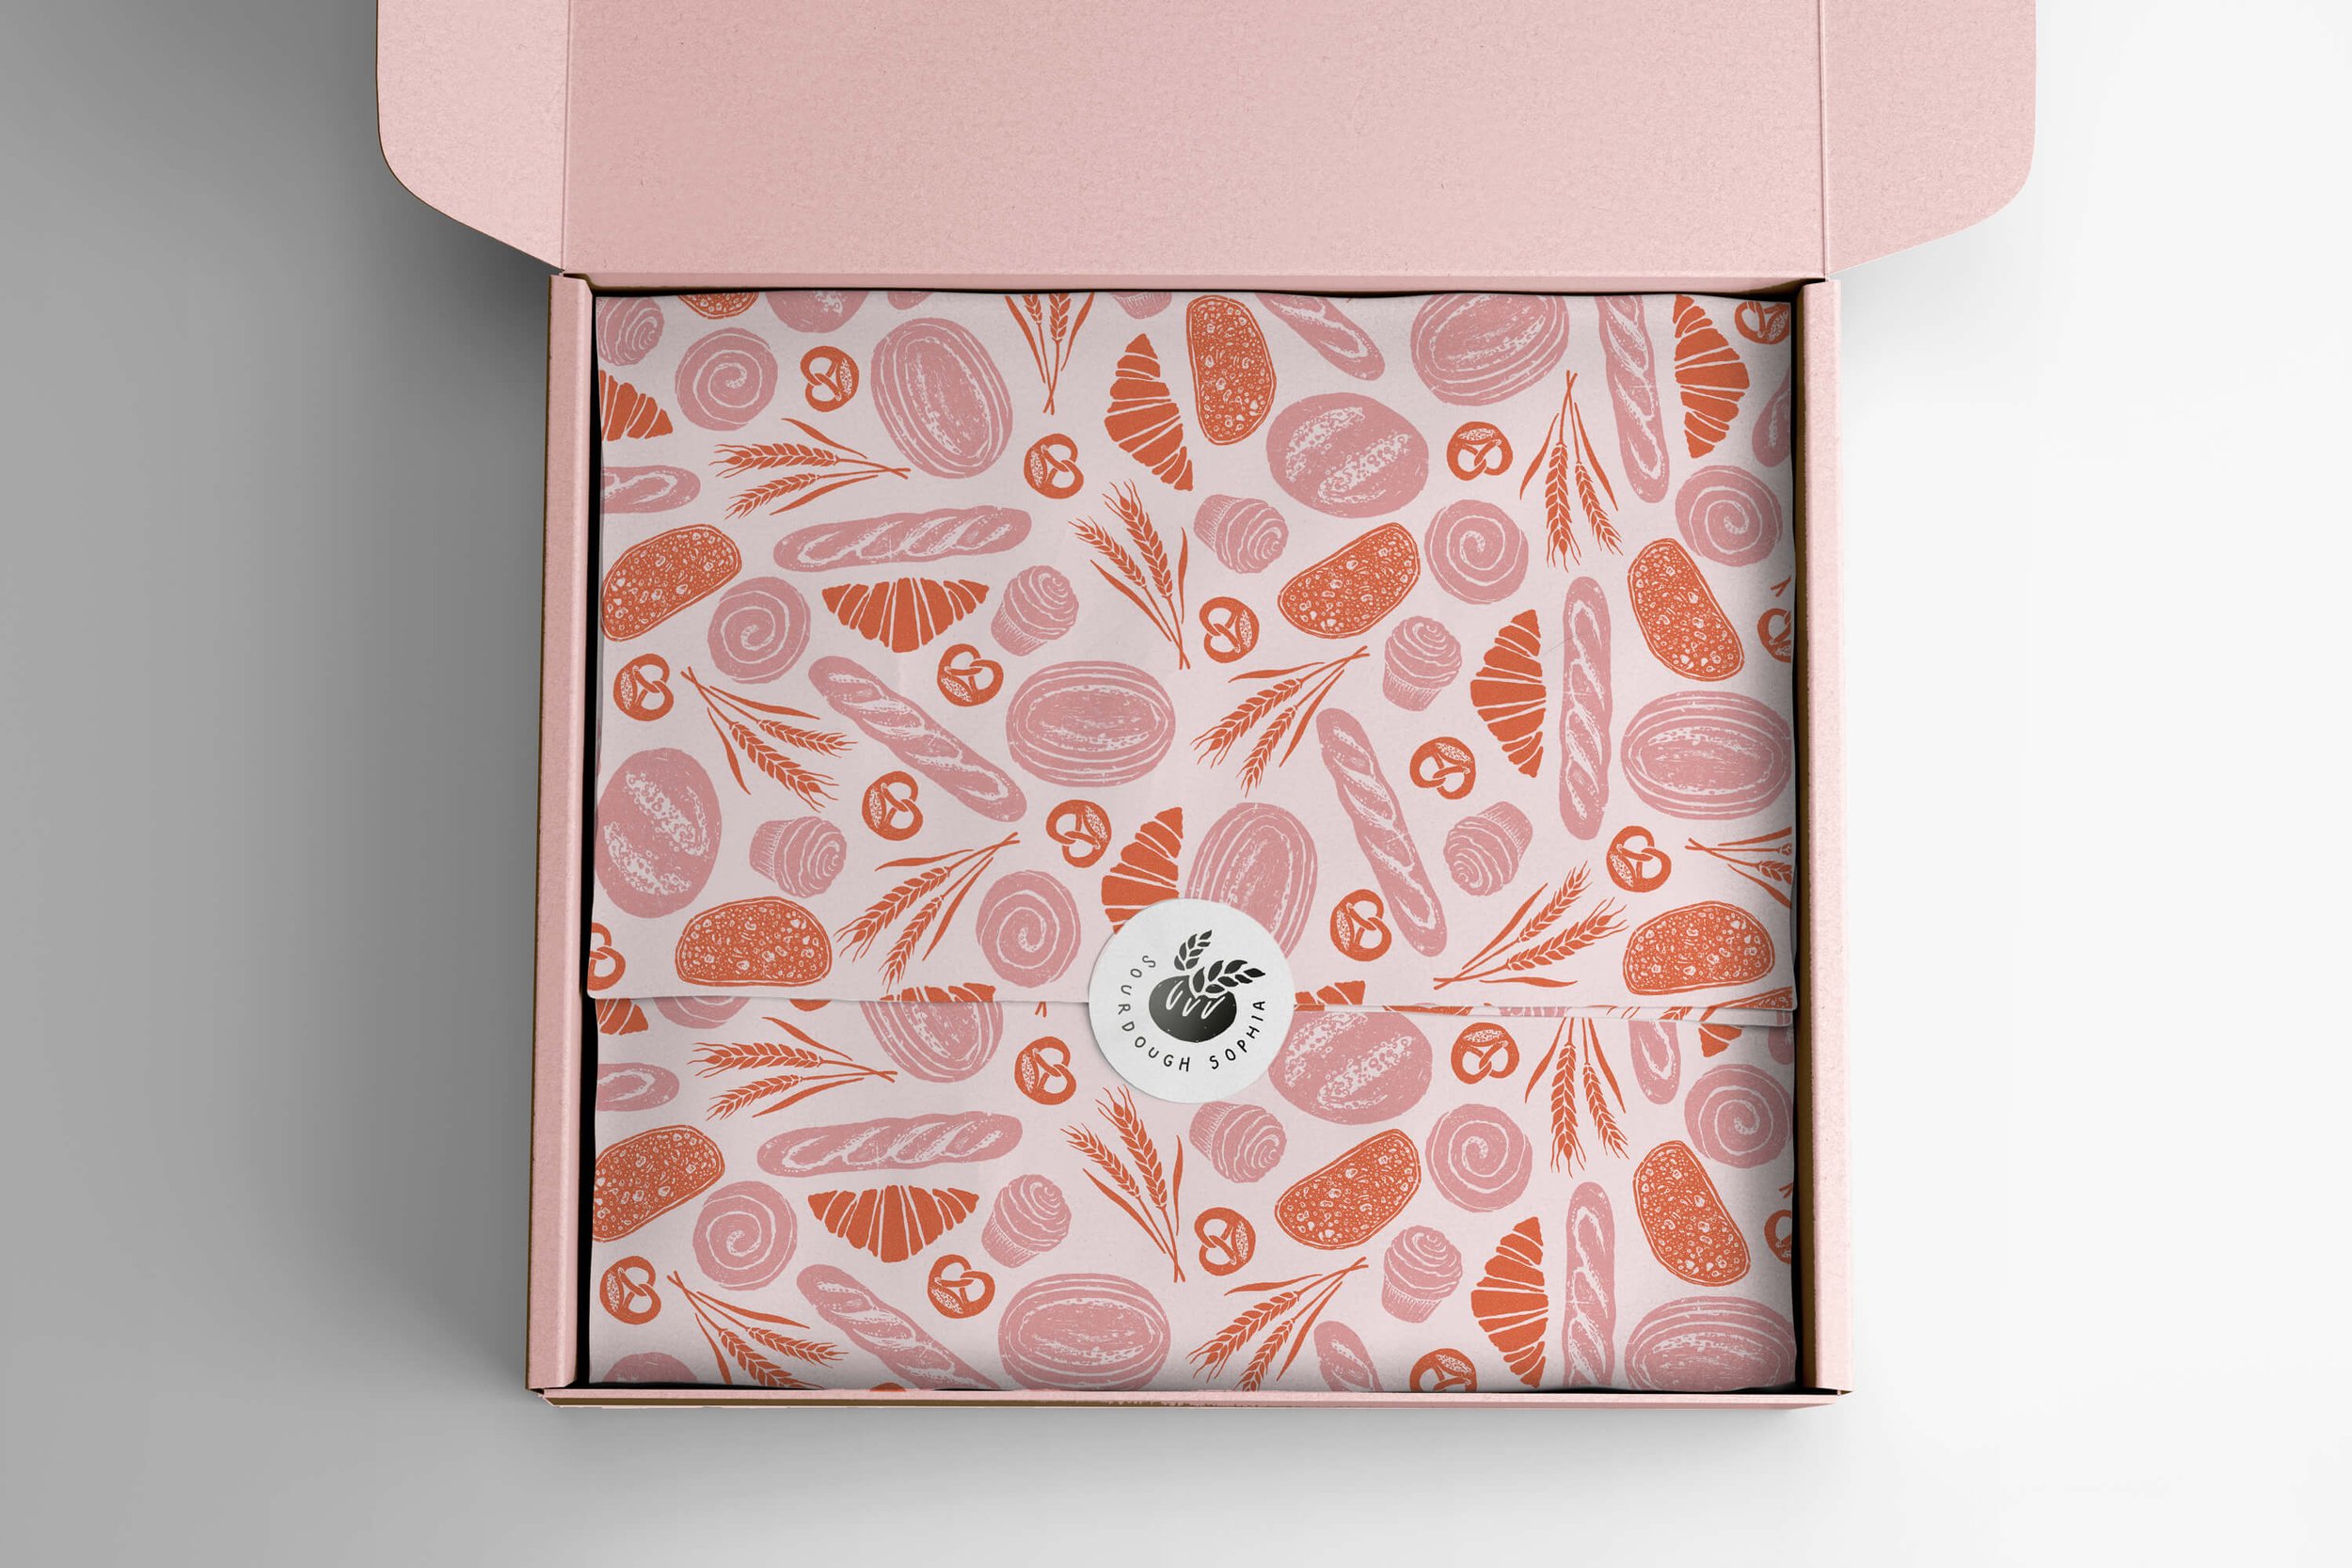  Box with tissue paper design with an illustrative pattern illustration of breads and bakes..The pattern is for a range of packaging for a bakery in pinks and orange with a hand drawn and textured feel. 